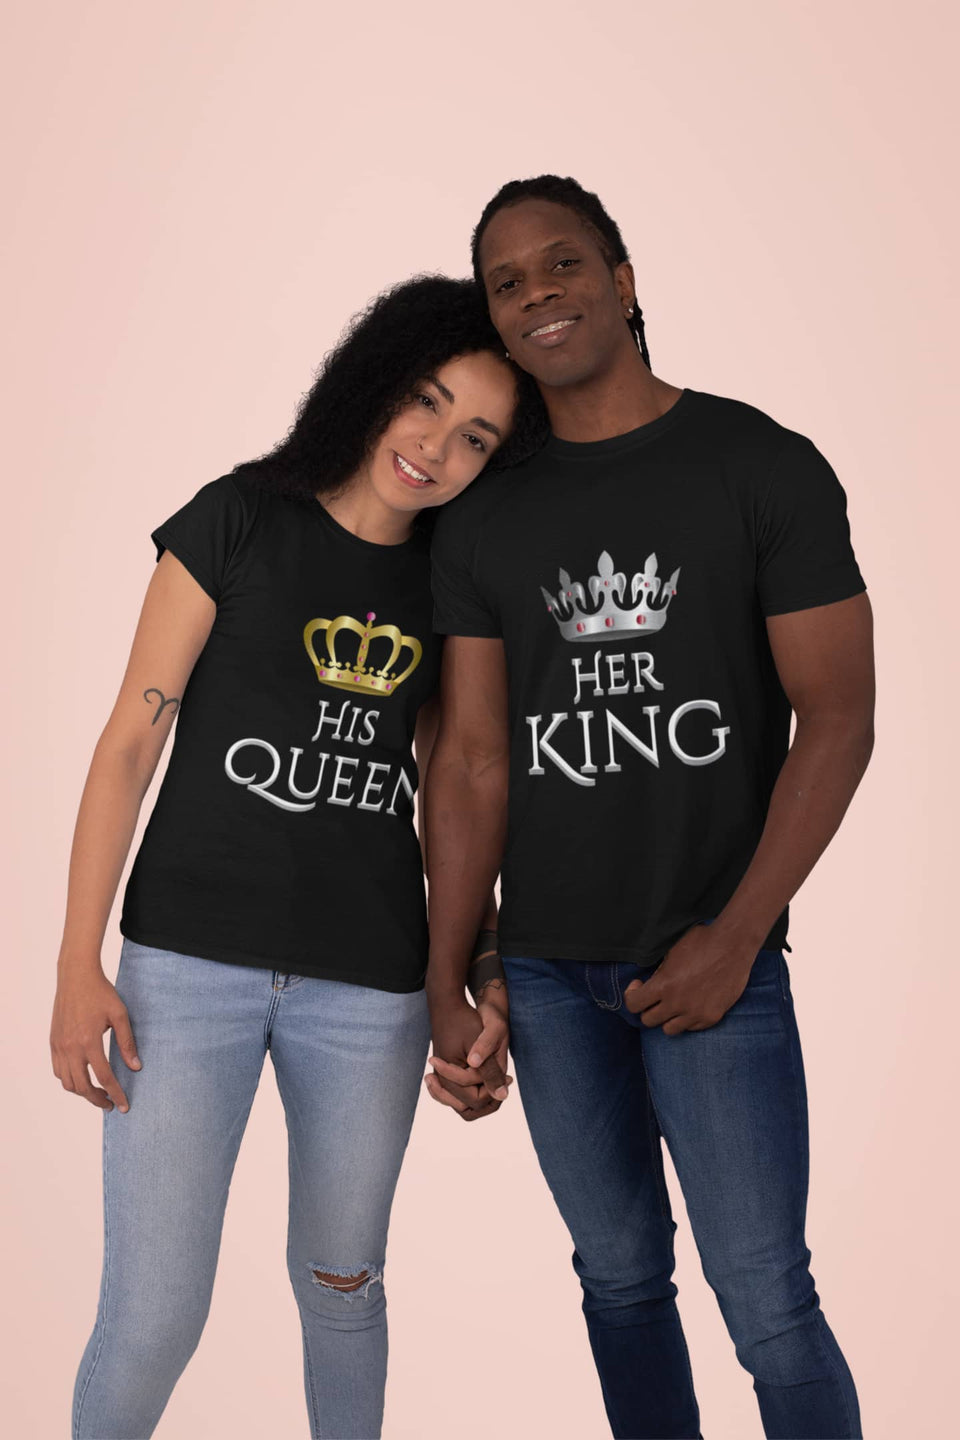 Her King His Queen Couple Matching Shirts